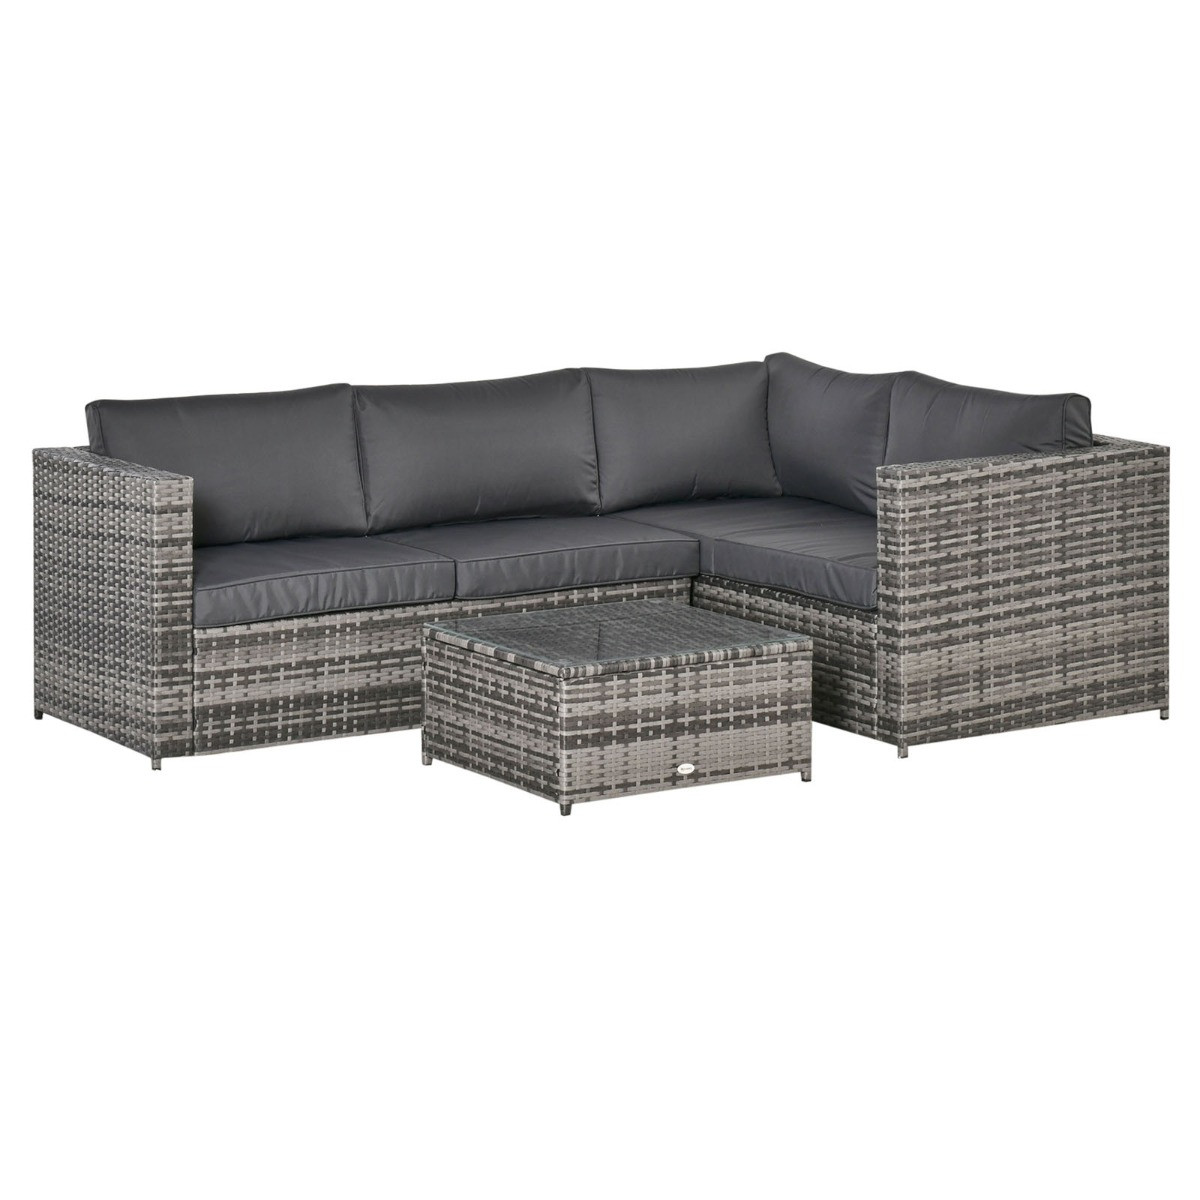 Outsunny Rattan Corner Sofa Set With Coffee Table, Grey - 4 Seater>